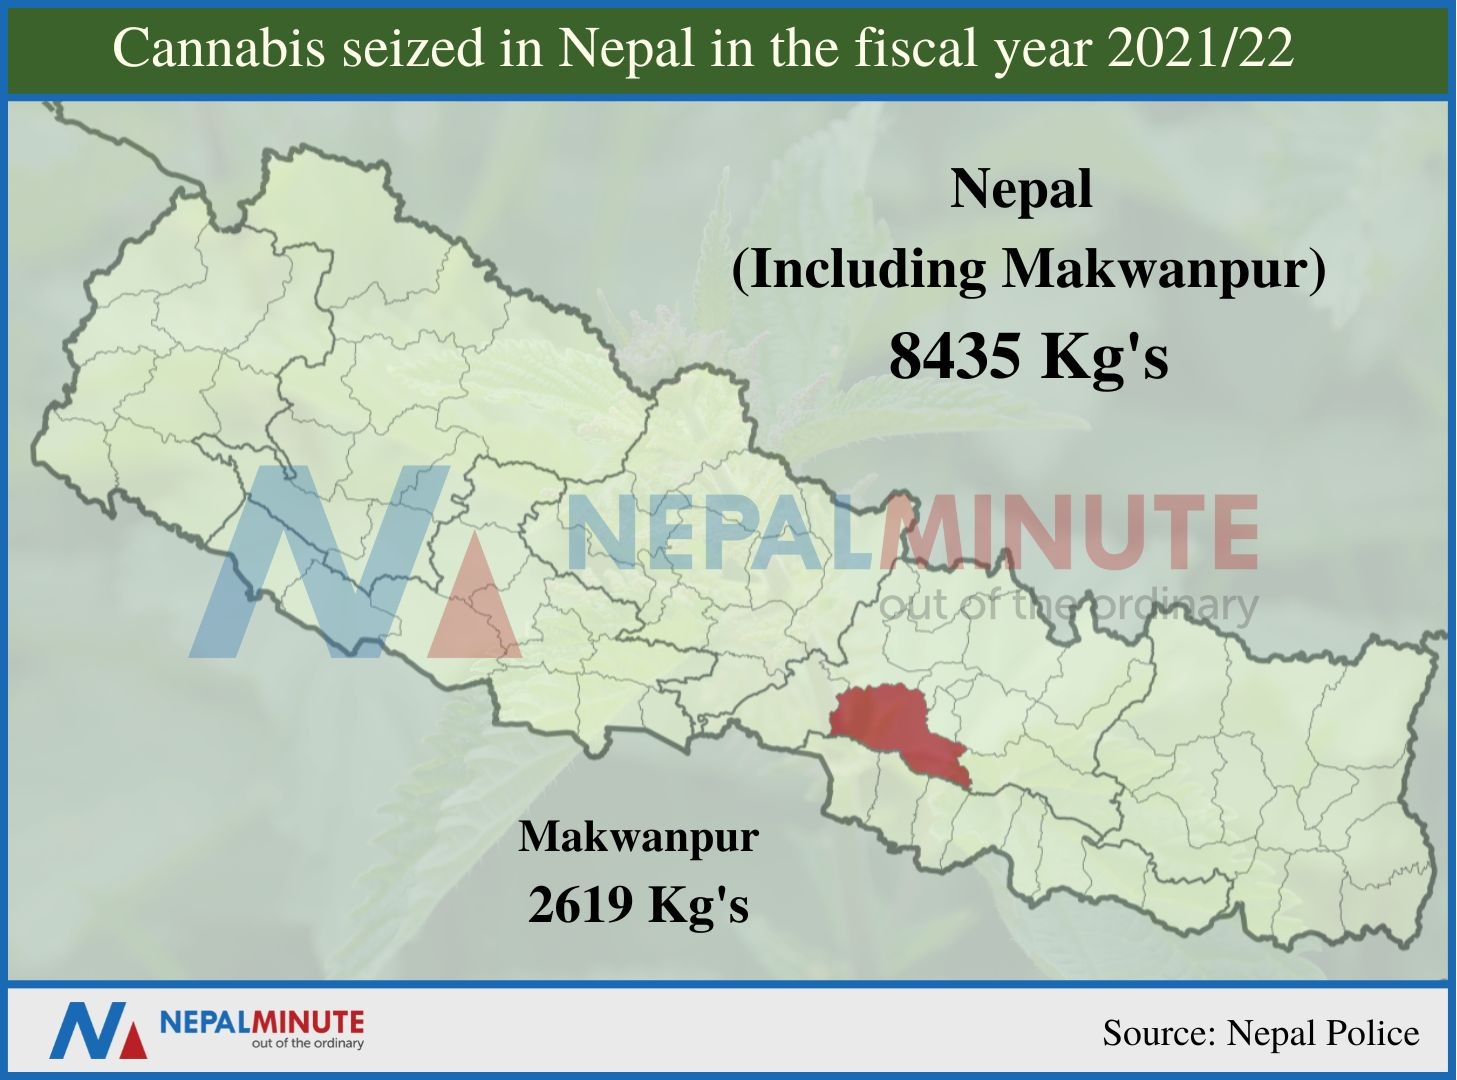 Figure showing the amount of cannabis seized in Kathmandu and Makwanpur in the Fiscal year 2021.221657179584.jpg